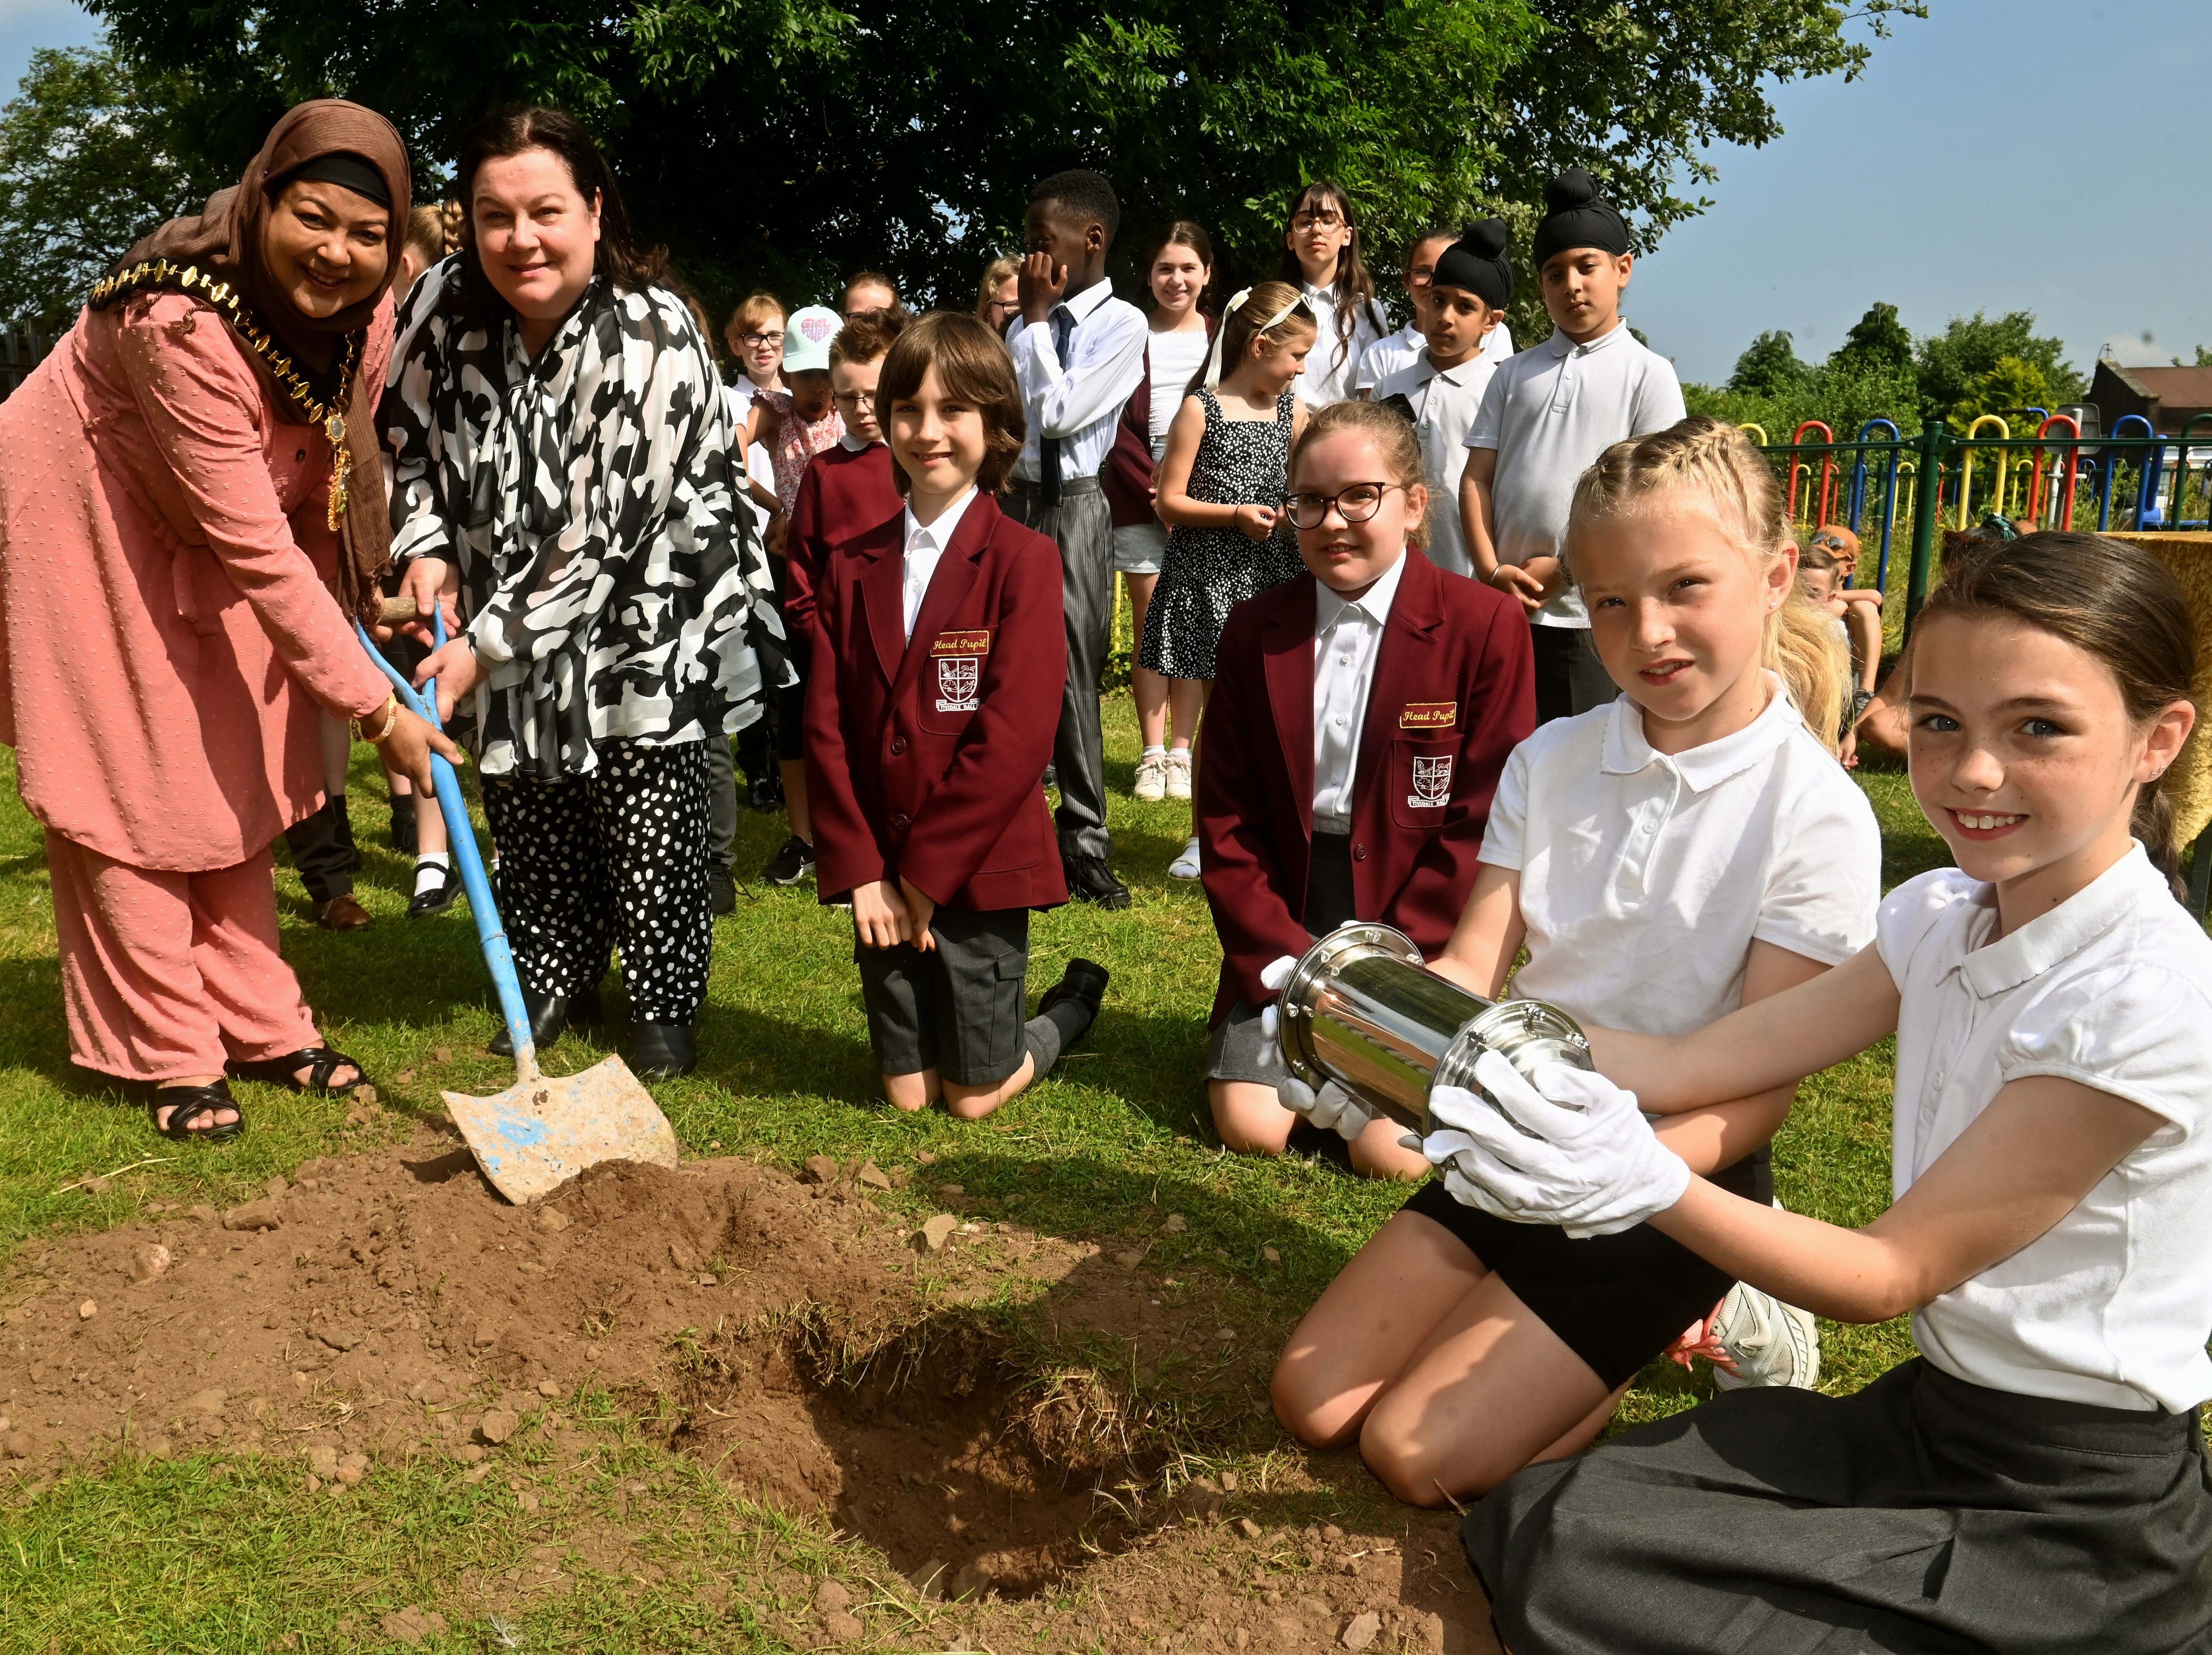 School buries lasting monument to school for future generations to view